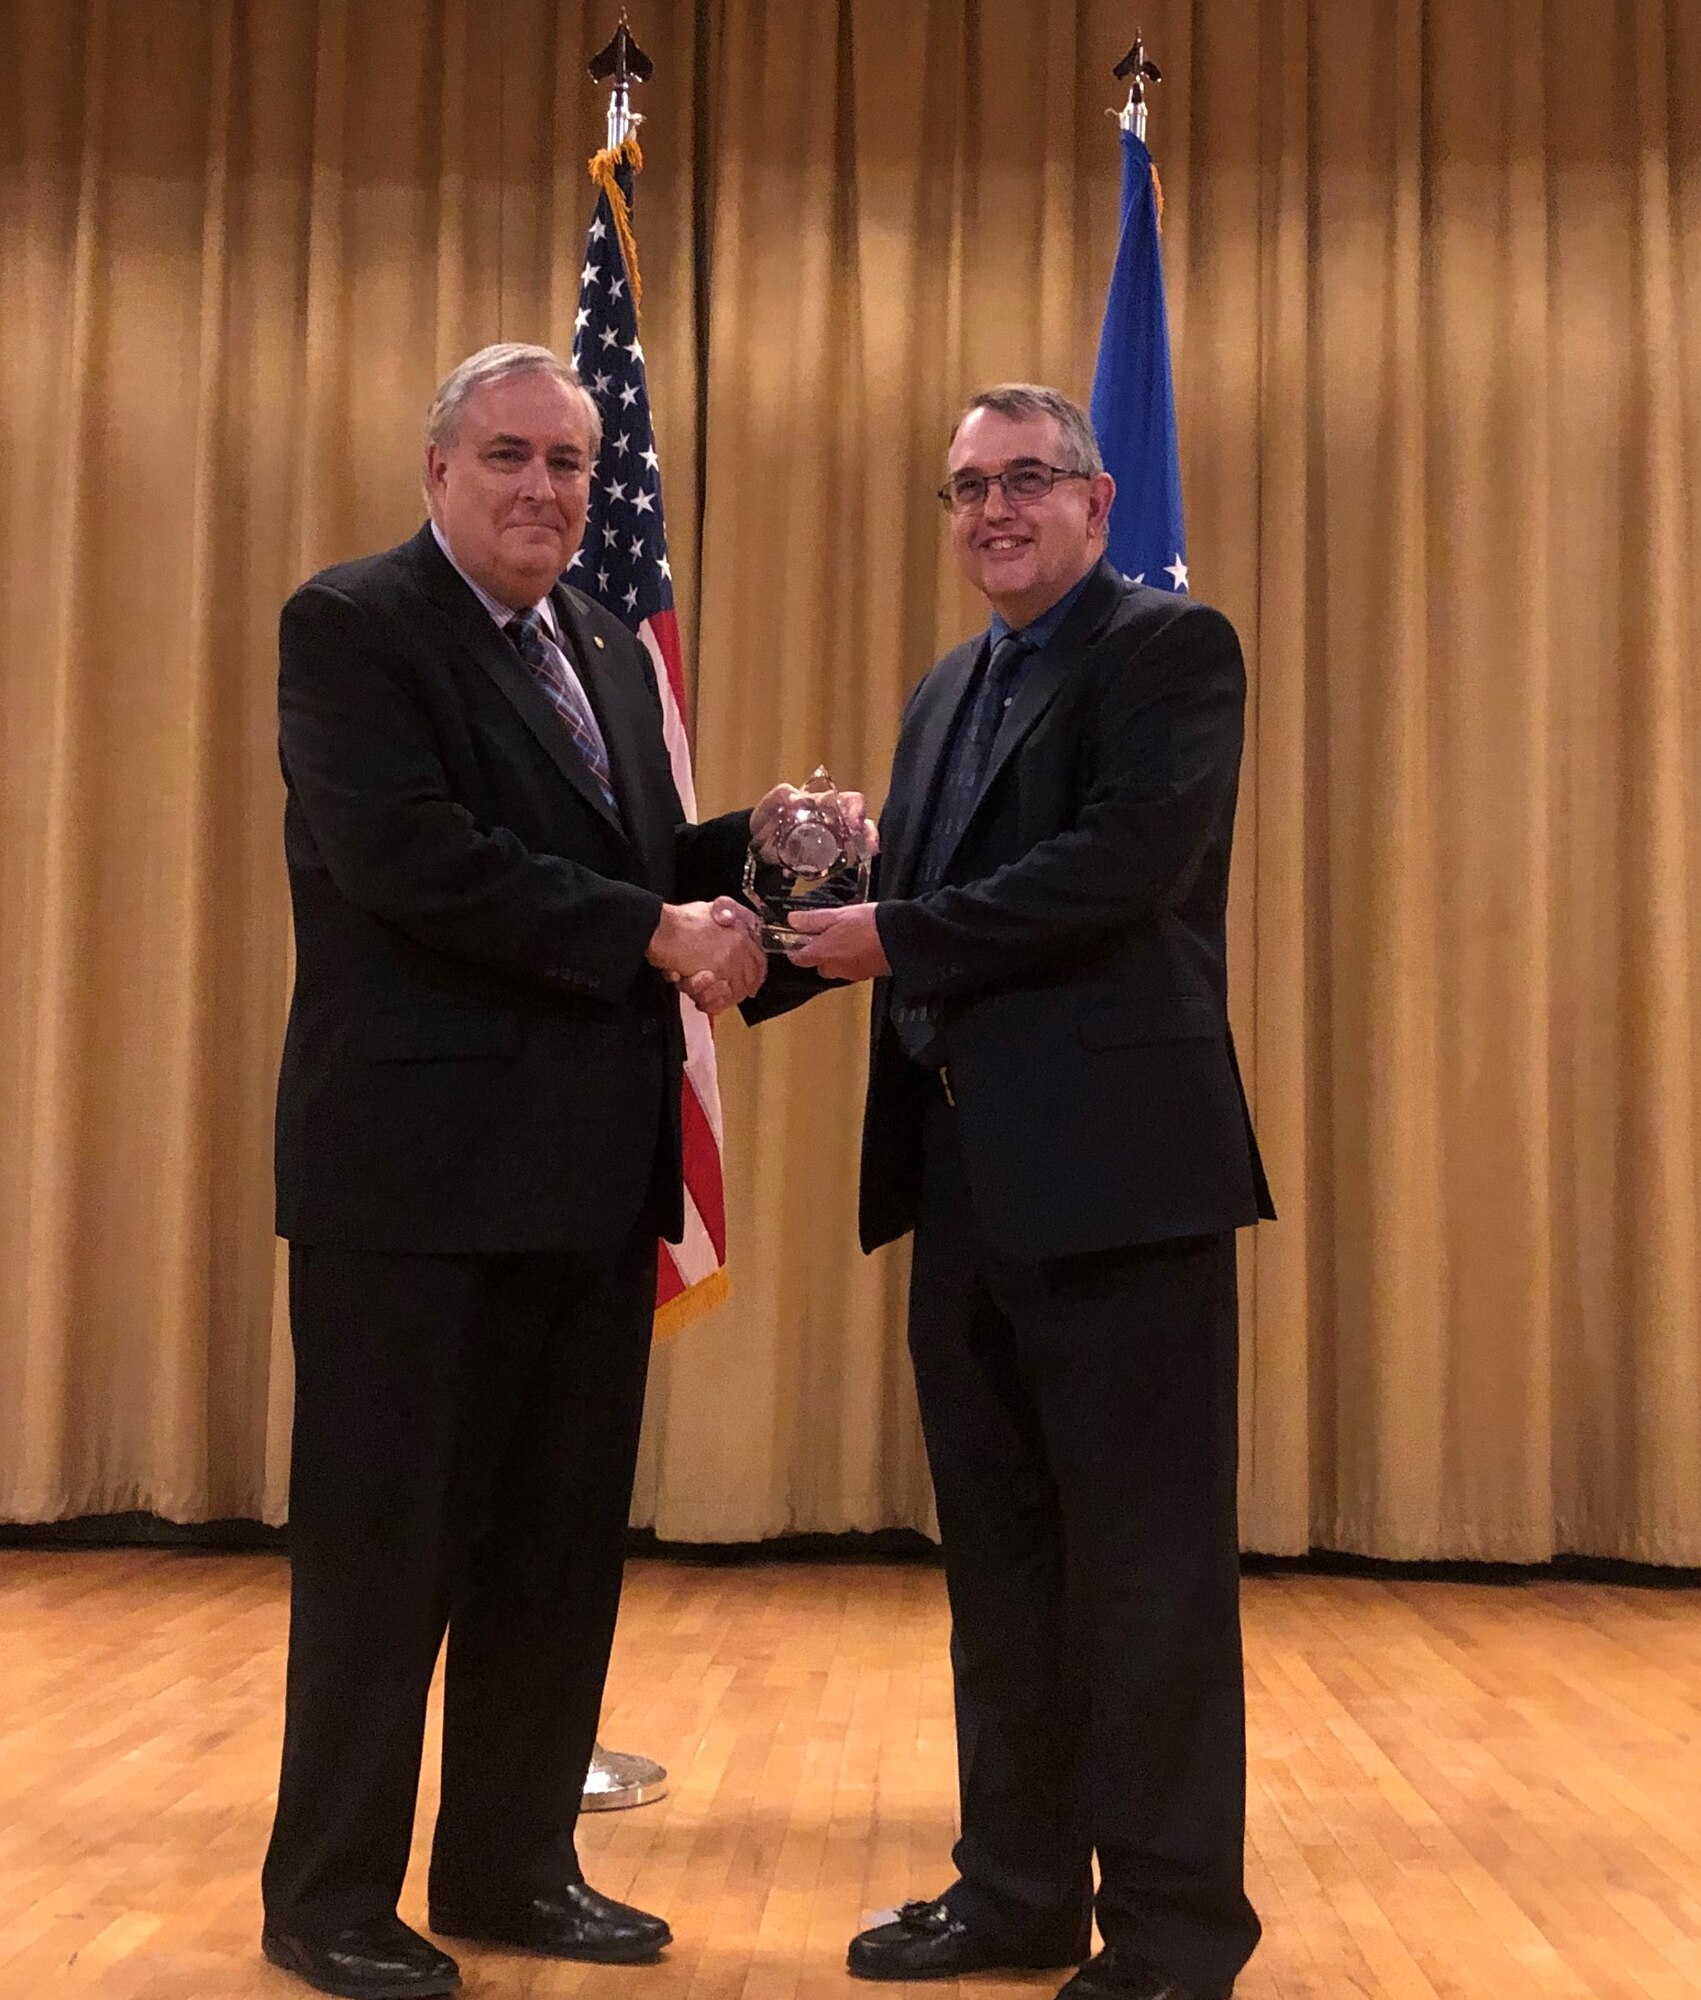 Gary Motsek, Defense deputy assistant secretary for product support, presents Lynn Betts, product support manager for the Ground Based Strategic Deterrent program, with the 2018 Secretary of Defense Product Support Manager Award in the category of Major Defense Acquisition Programs (Acquisition Category I and Other Weapon Systems) on April 11 at Hill AFB, Utah.  The award recognized Betts’ innovative approach to lifecycle and product support management for the $83-billion GBSD program, currently one of the Air Force’s largest acquisition programs.  (Courtesy photo by Tyler Deamer)